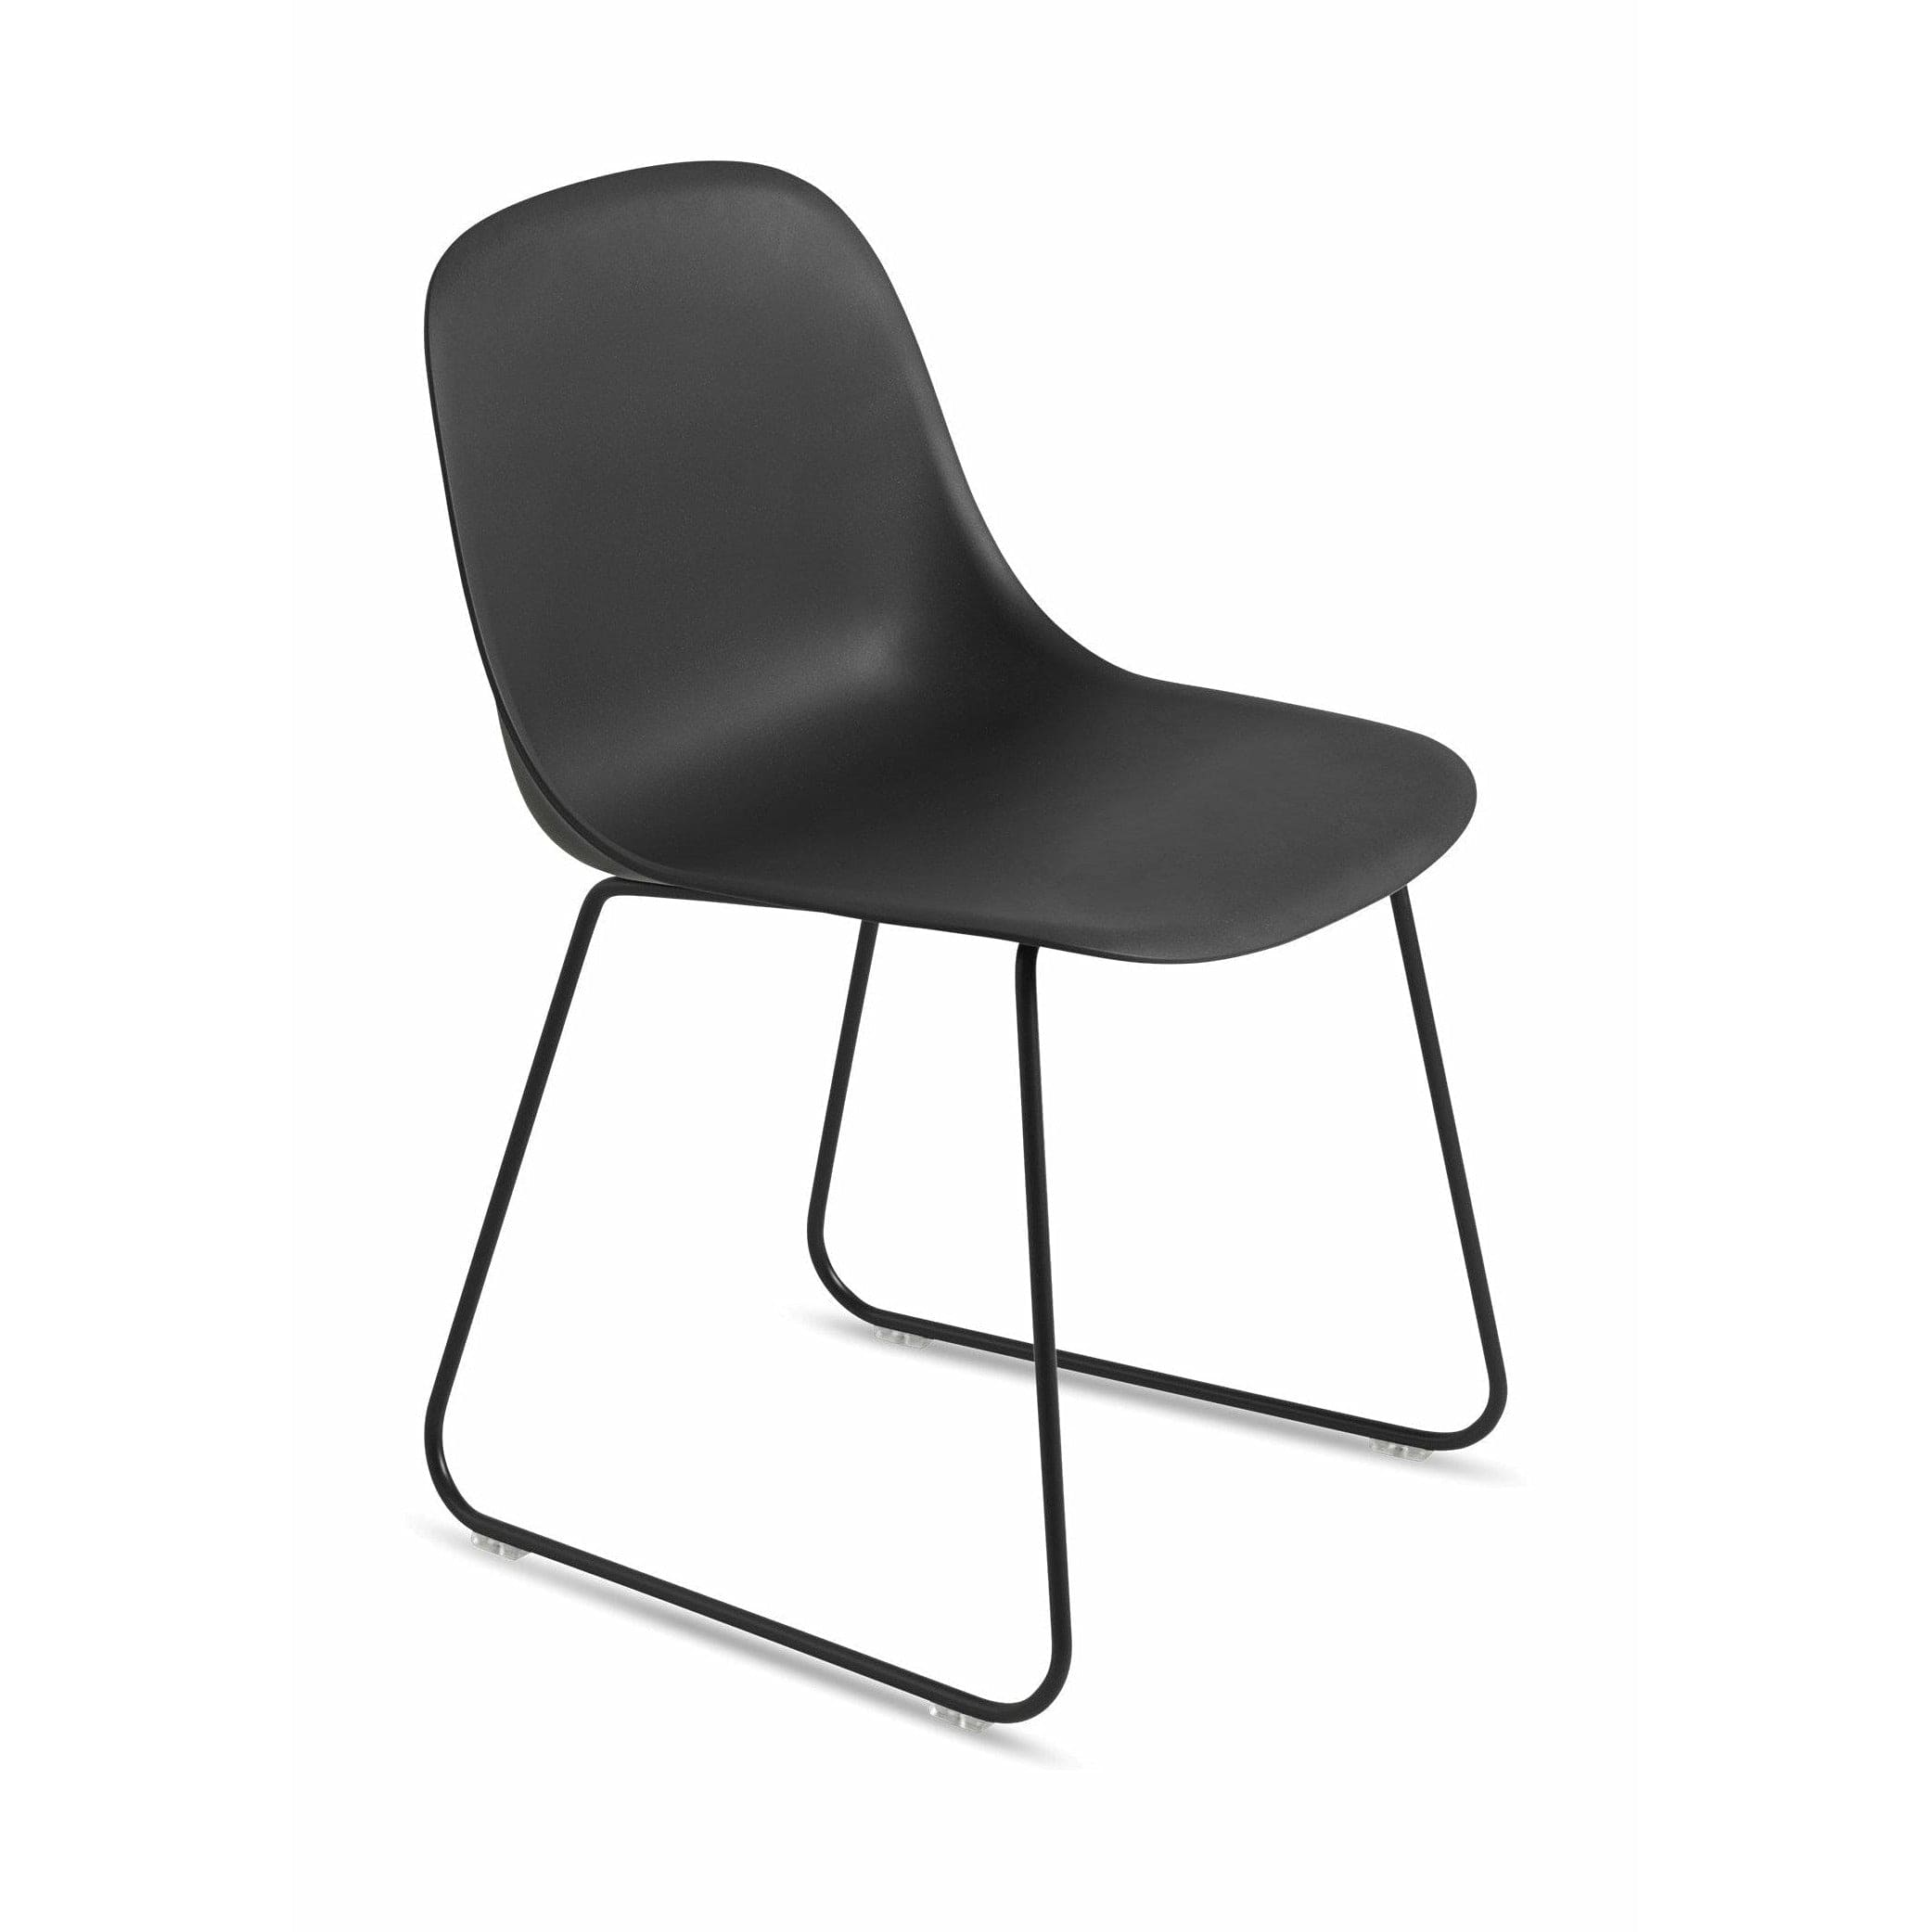 Muuto Fiber Side Chair Made Of Recycled Plastic Sled Base, Black/Black